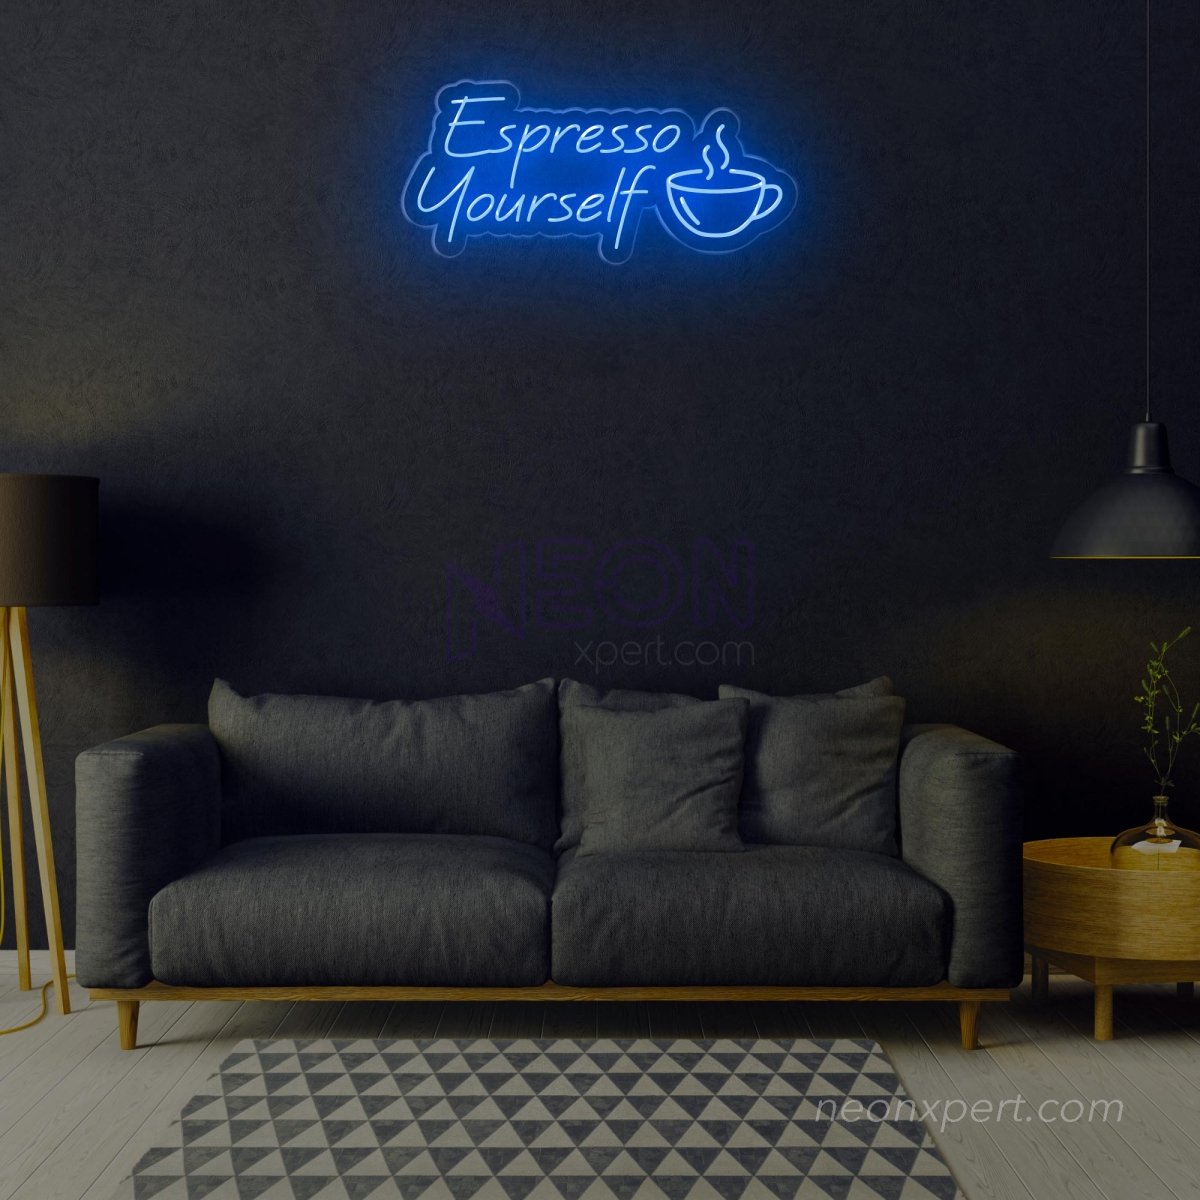 Espresso Yourself Neon Sign - Express Your Brew - NeonXpert